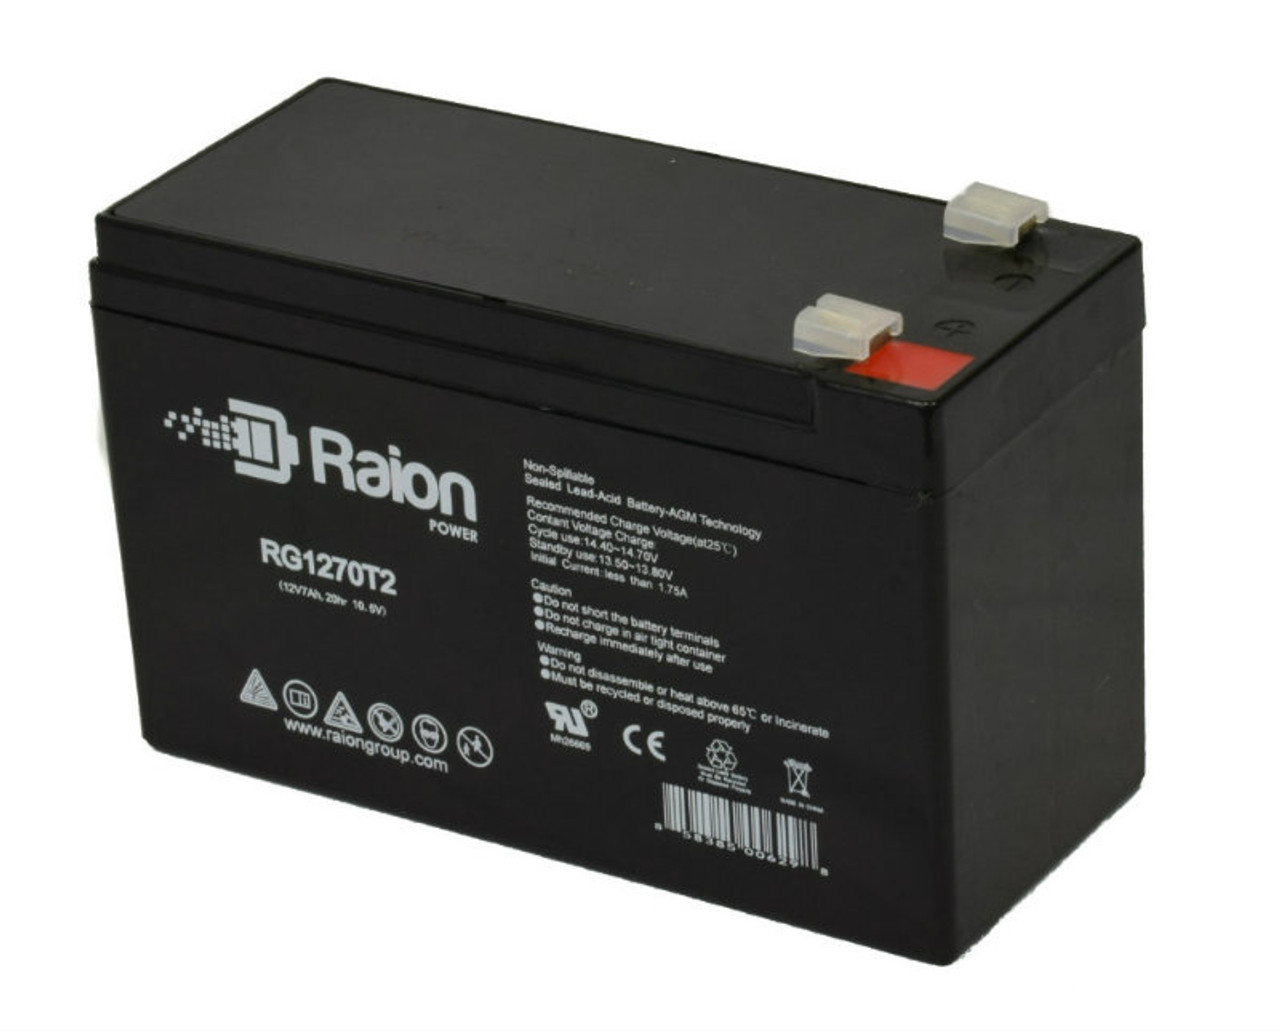 Raion Power RG1270T1 12V 7Ah Non-Spillable Replacement Battery for Panasonic LC-RB126R5P